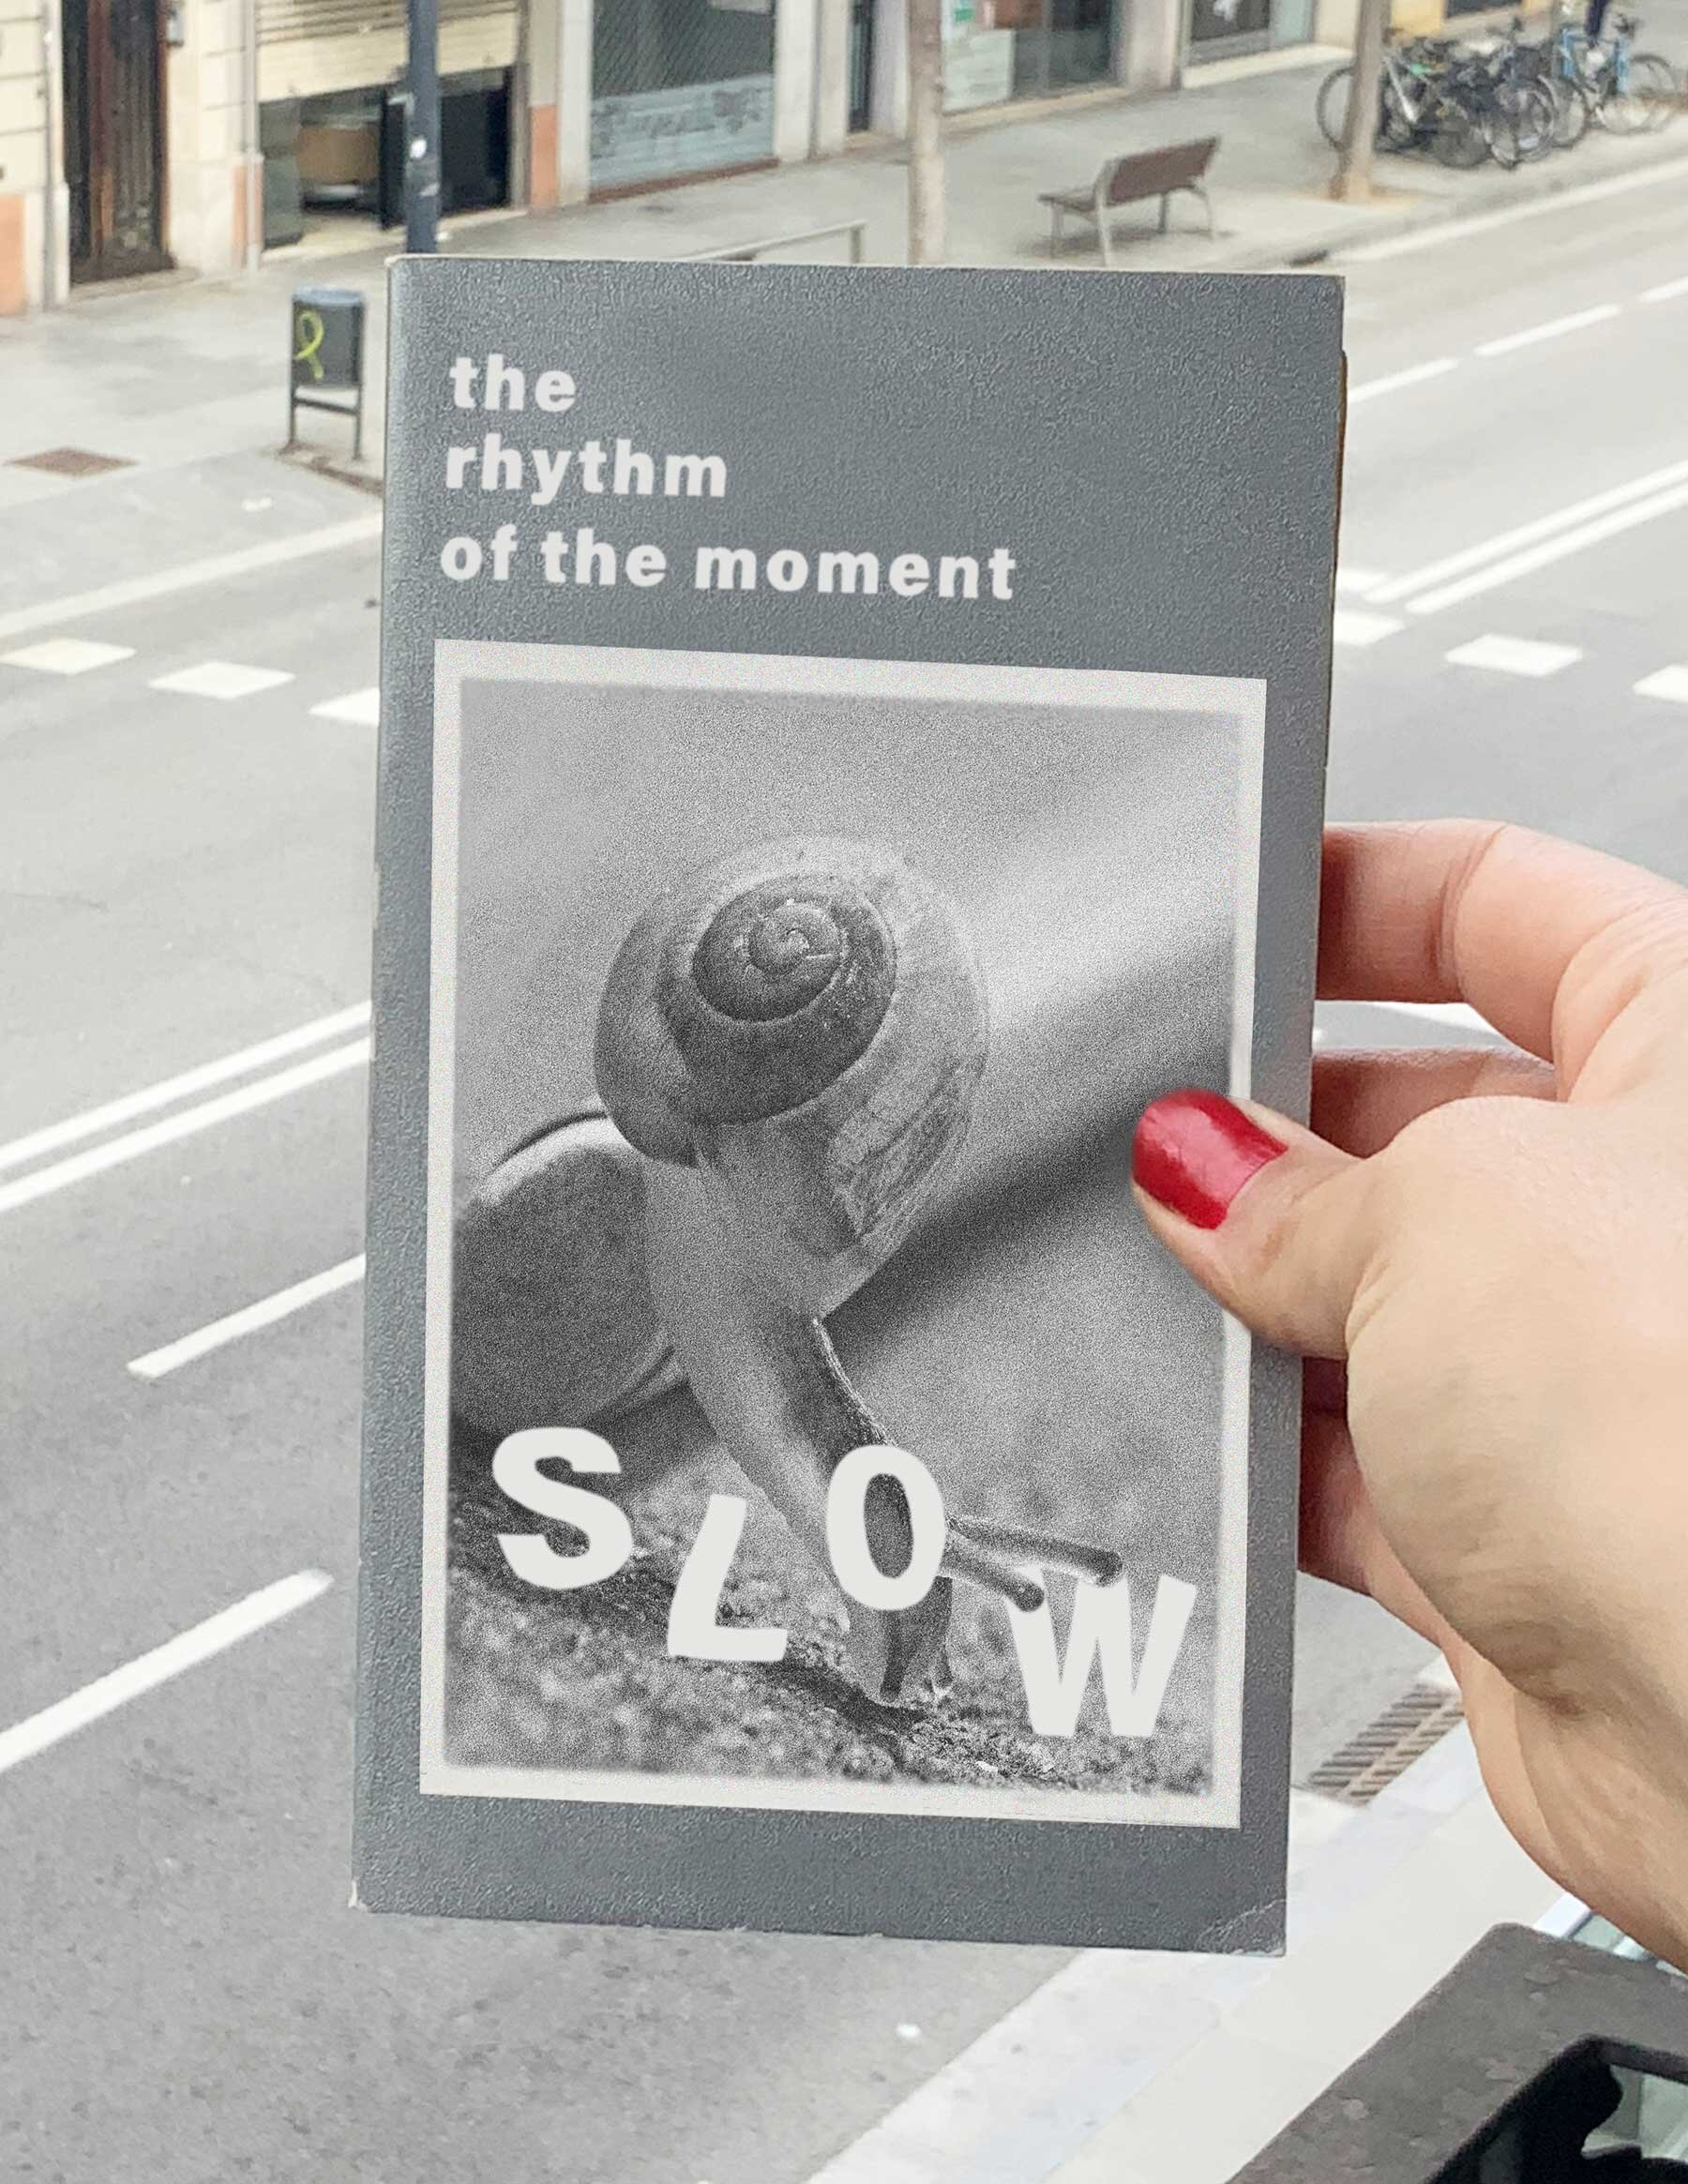 Slow is the rhythm of the moment